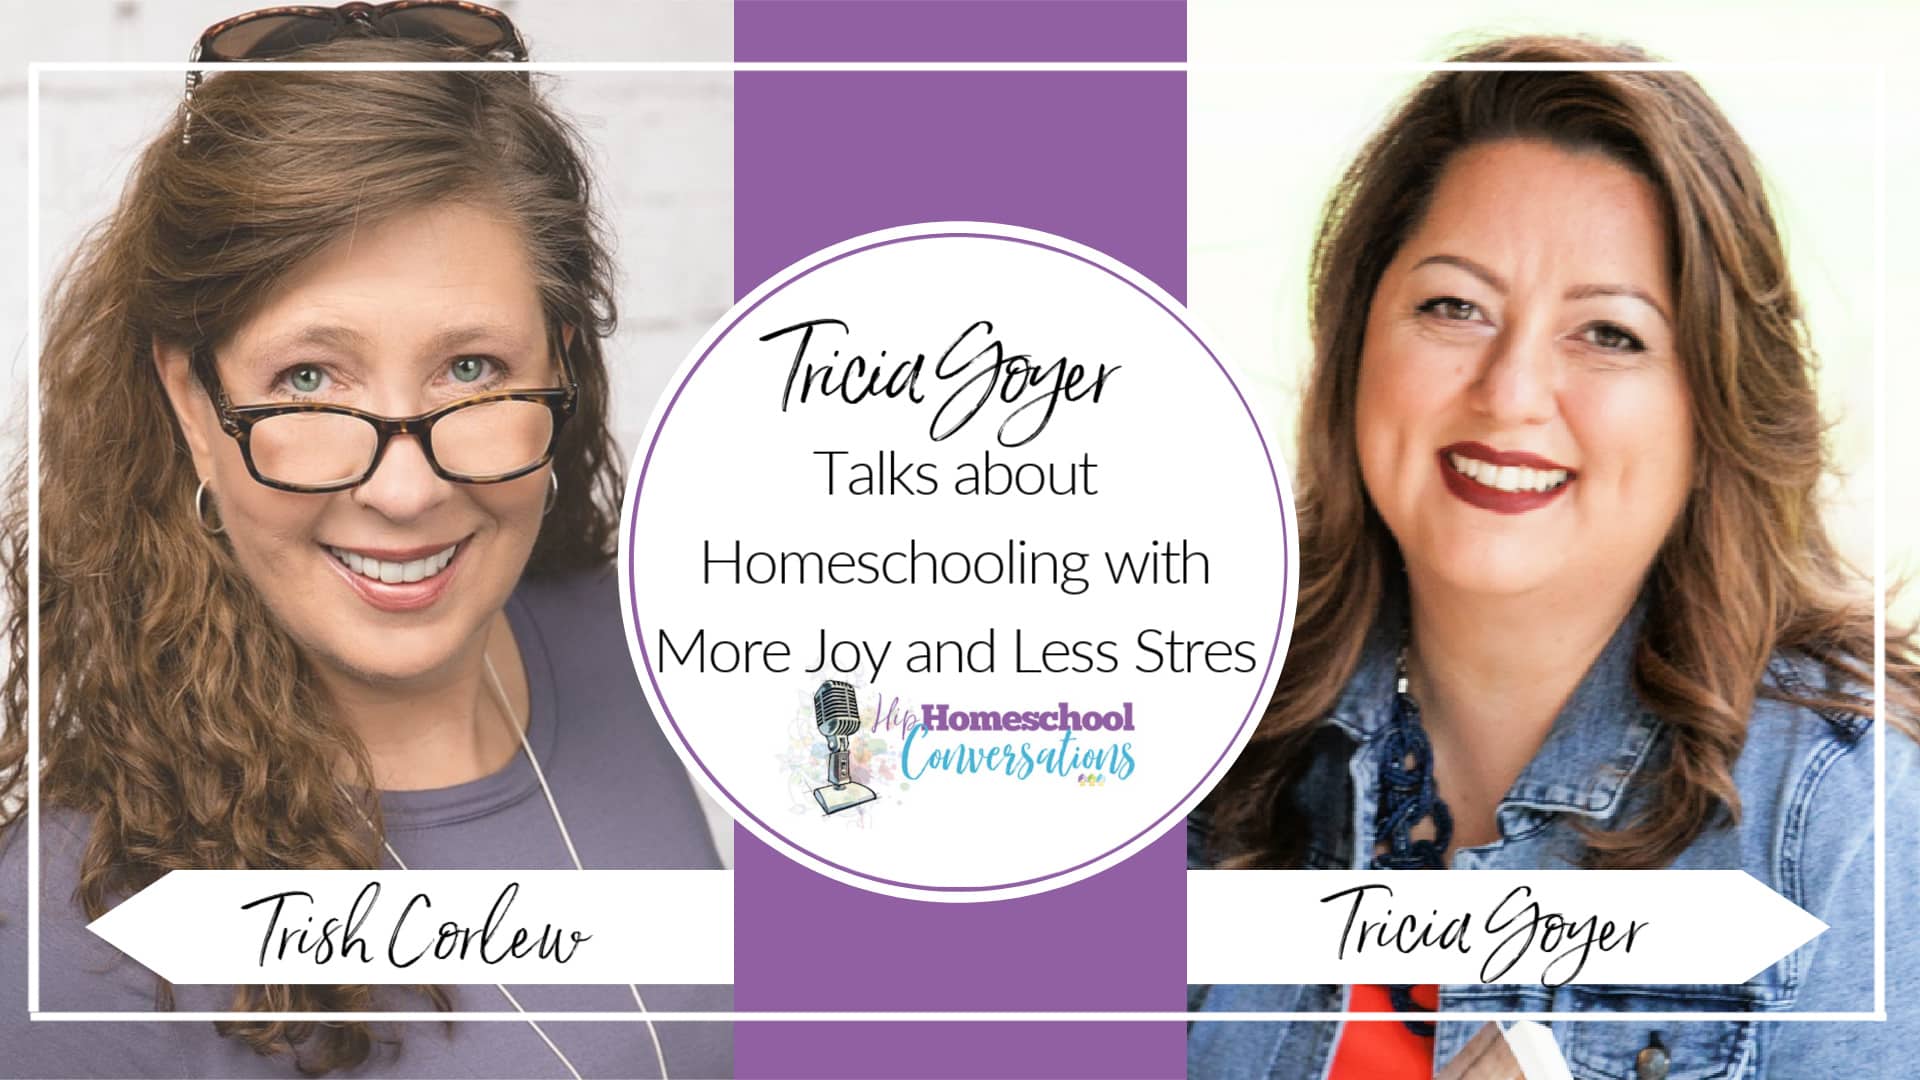 We’ve all felt it…the feeling that we need to do more, be more, cram more things into our homeschool day. Is it possible to achieve great things in our homeschools without working too hard or doing too much? Tricia Goyer gives her hard-earned insights on concepts such as these (and so many more) in this encouraging, interesting, and uplifting interview.